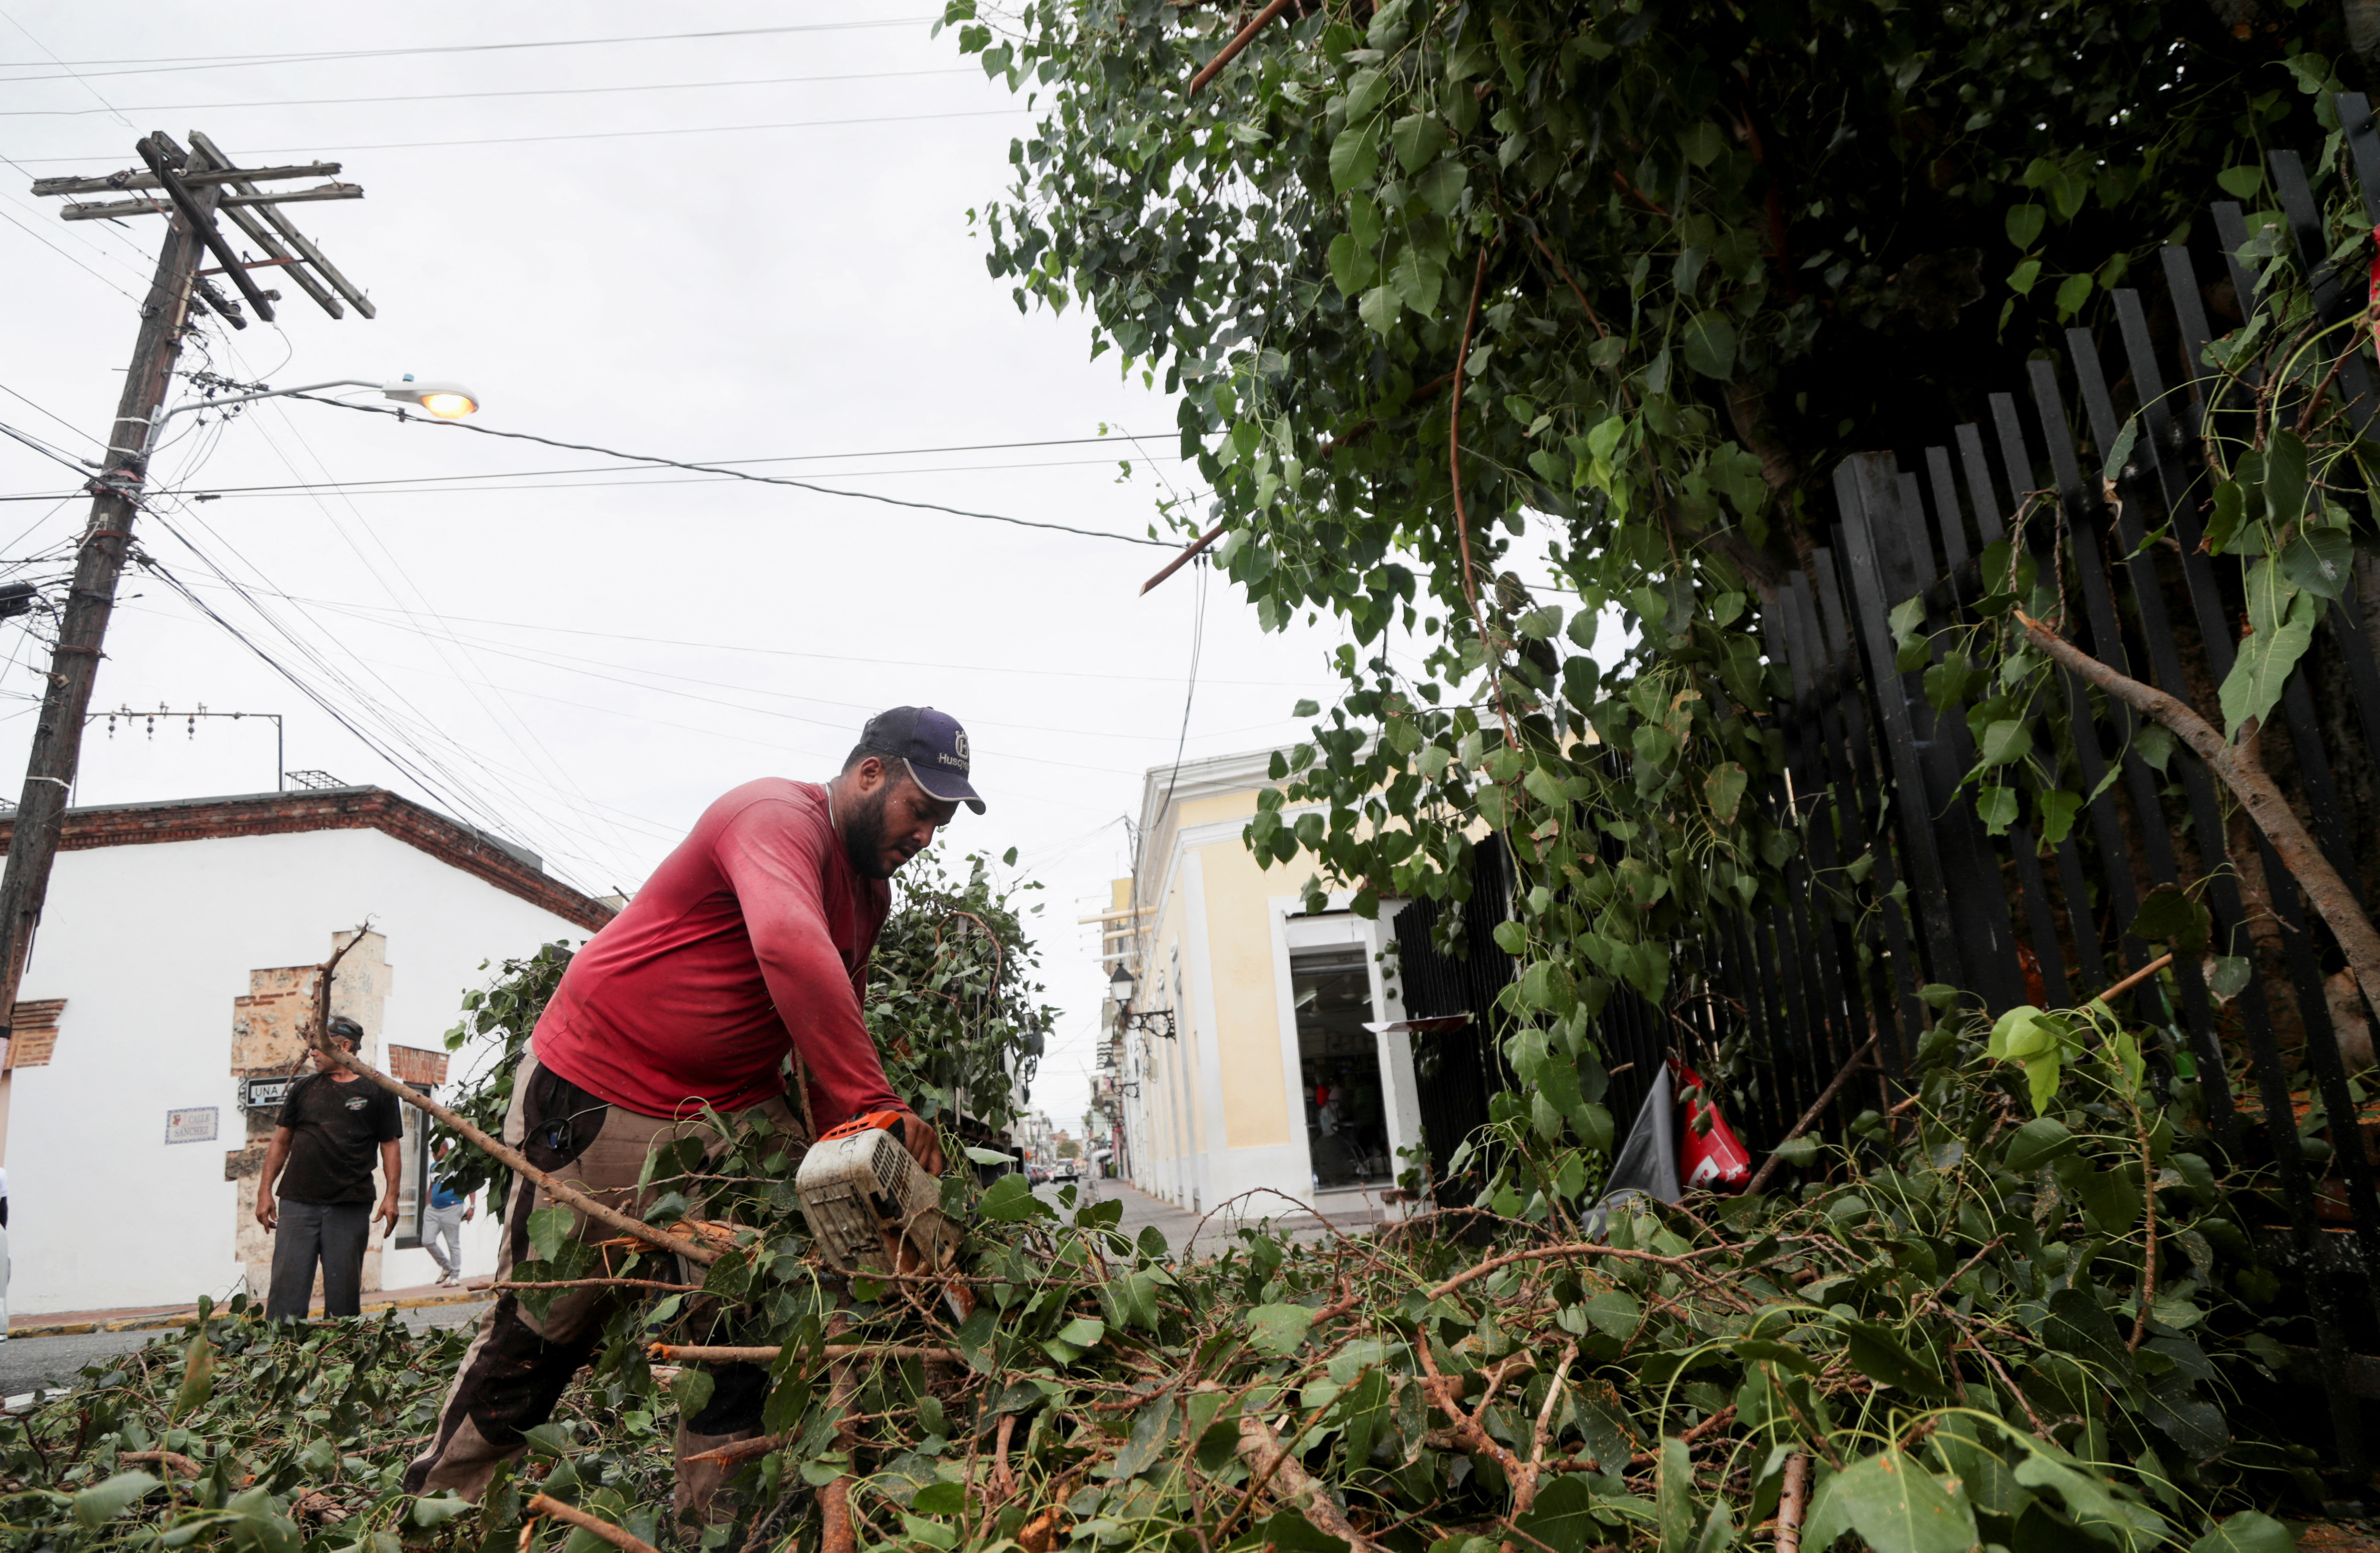 Workers cut tree branches in preparation for Hurricane Fiona, in Santo Domingo